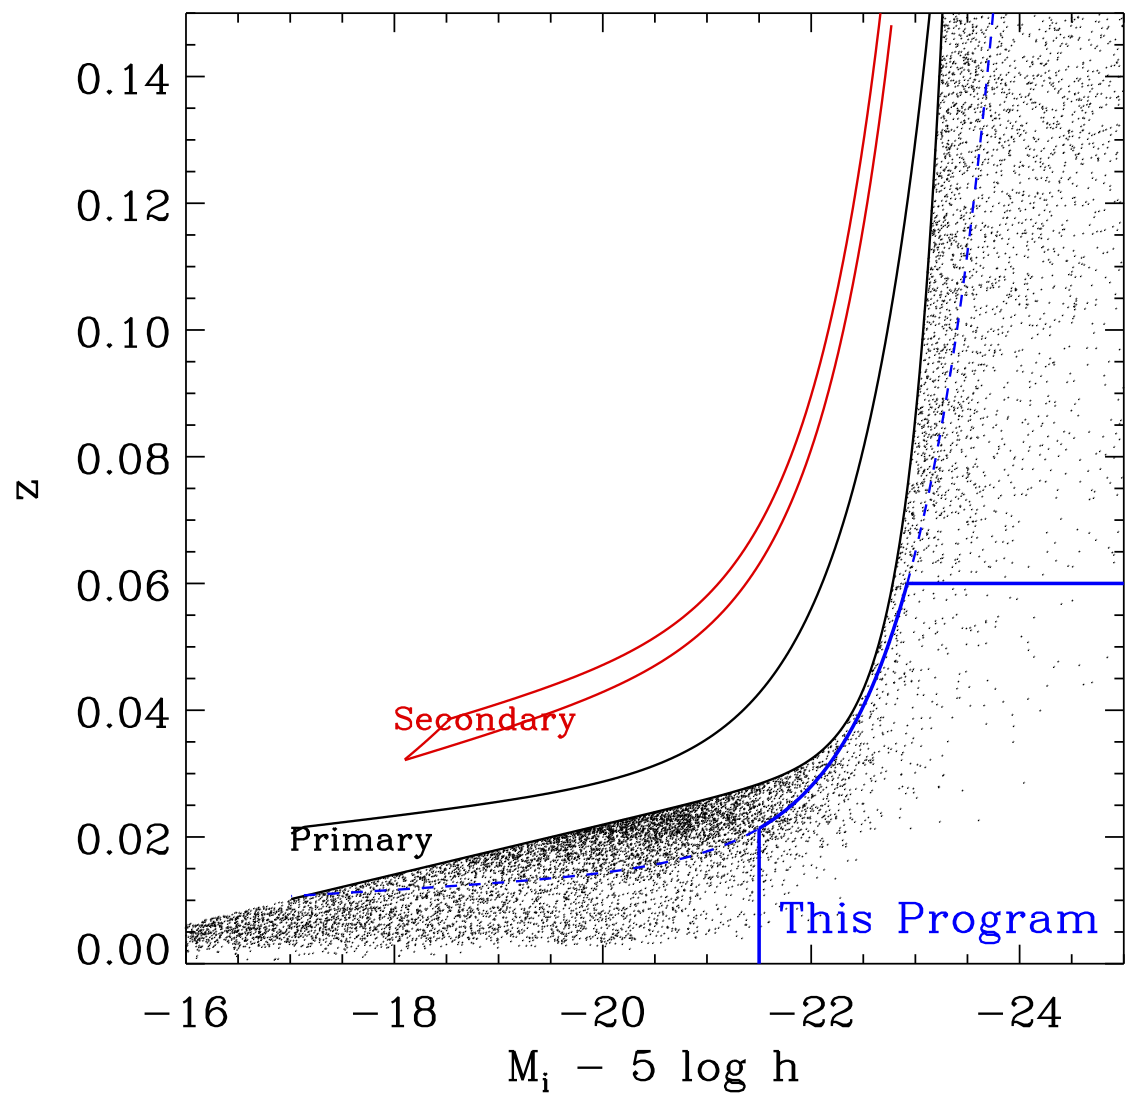 Selection cuts for the Massive Nearby Galaxies ancillary program. The black and red curves indicate the redshift cuts of MaNGA's Primary and Secondary samples. The blue curve and lines mark the upper redshift limit and magnitude limit adopted to select targets for this ancillary program. 